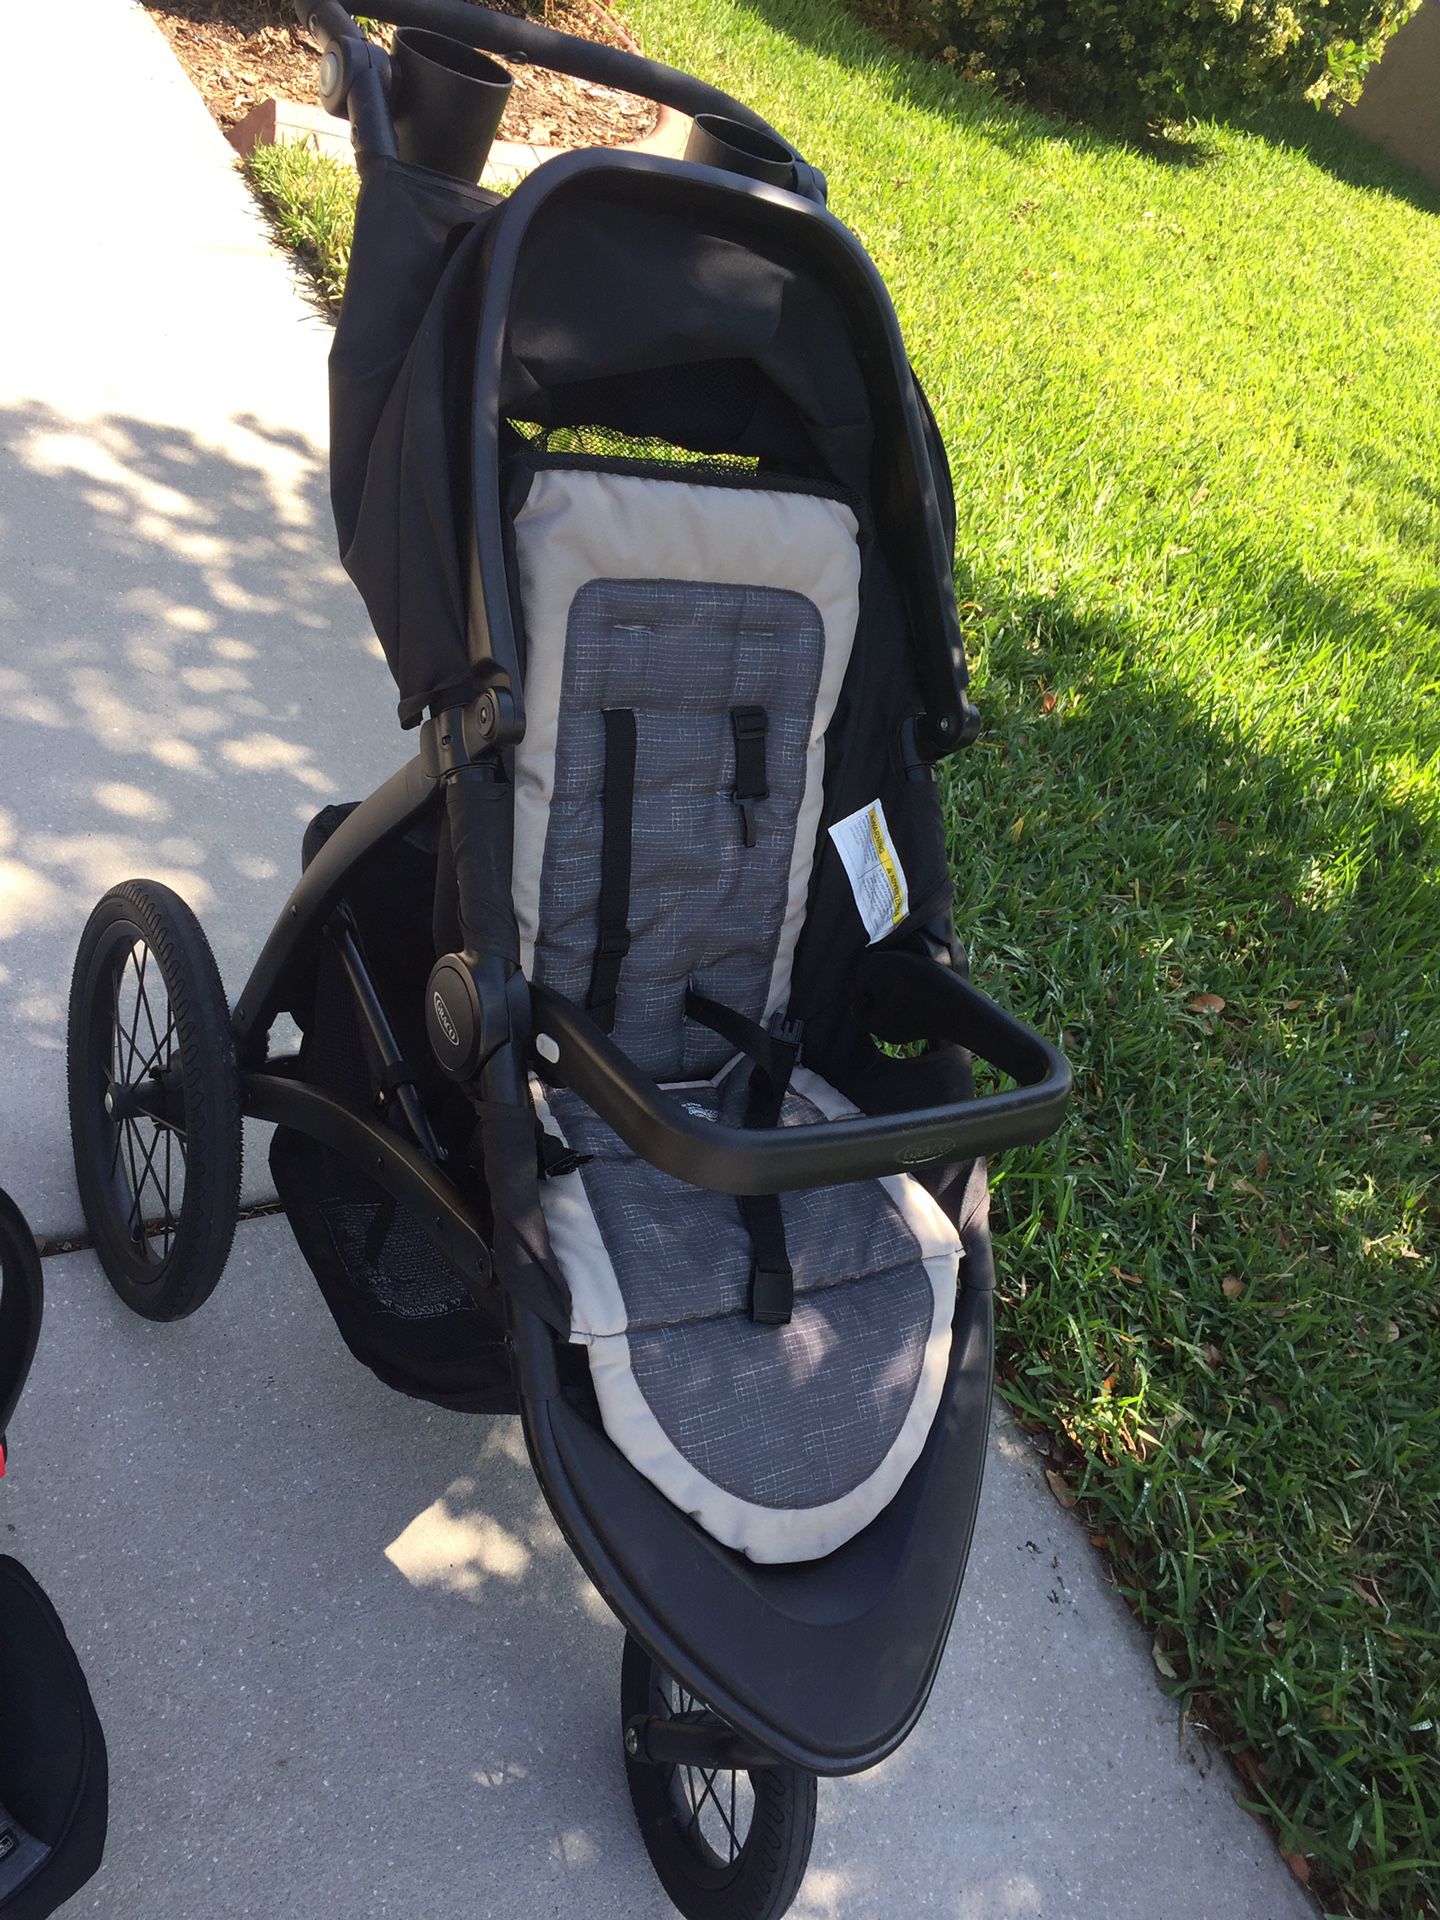 Graco jogging stroller, car seat, and base